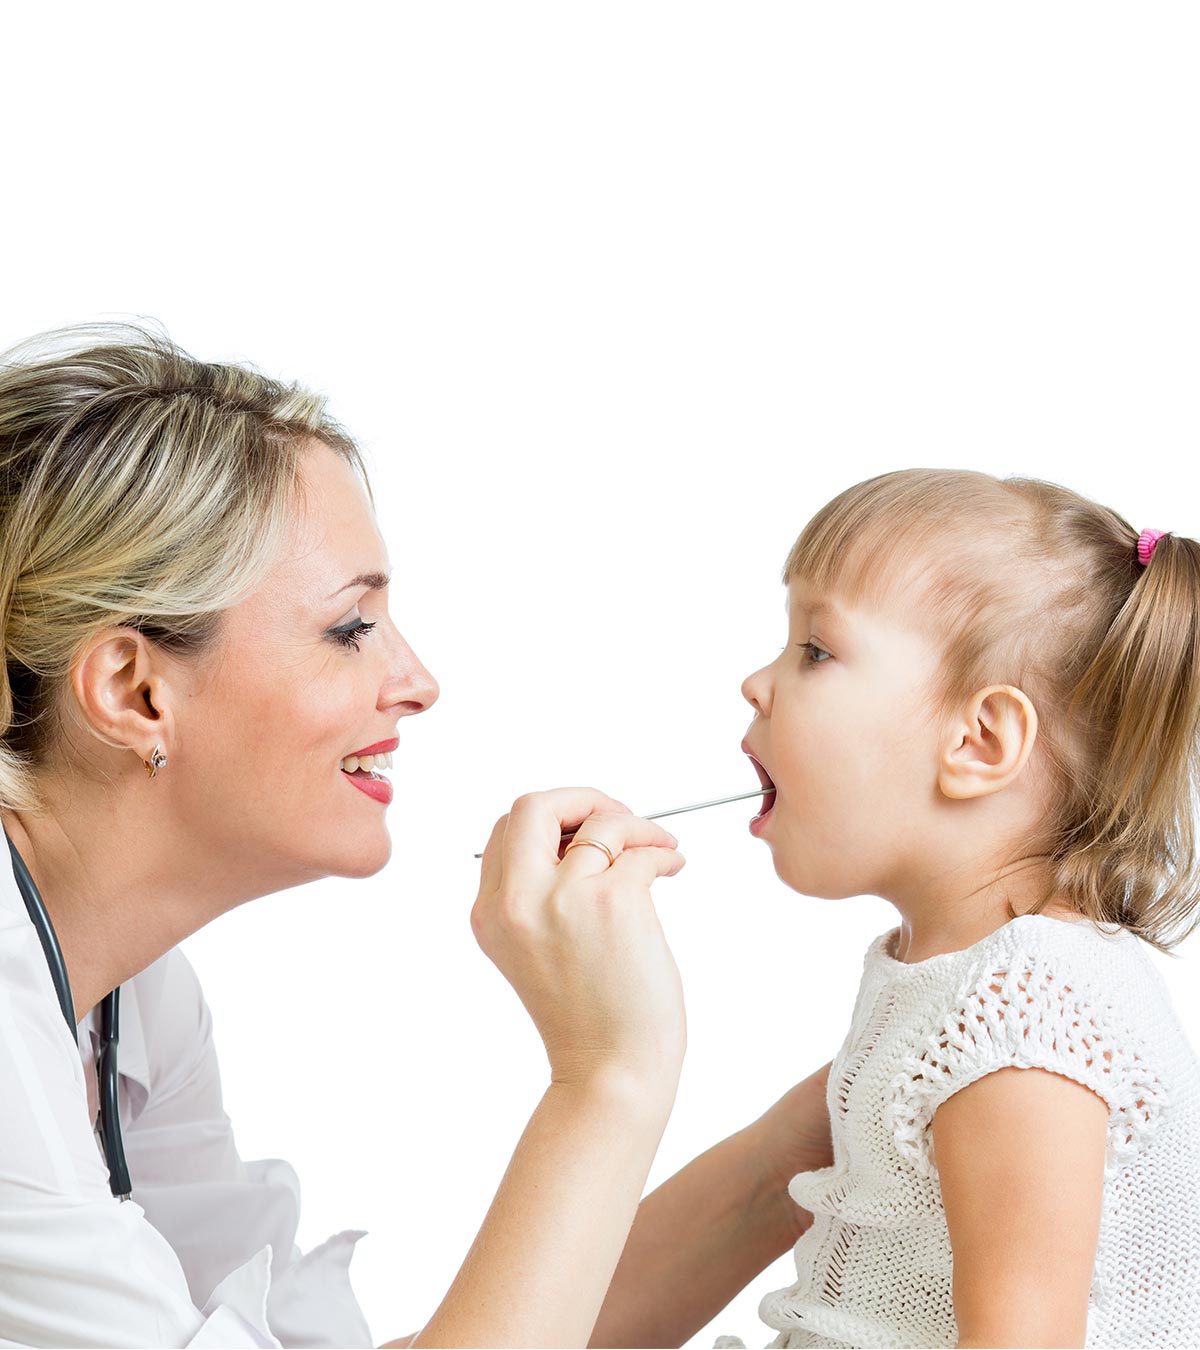 Strep Throat In Toddlers: Causes, Signs, Diagnosis & Treatment